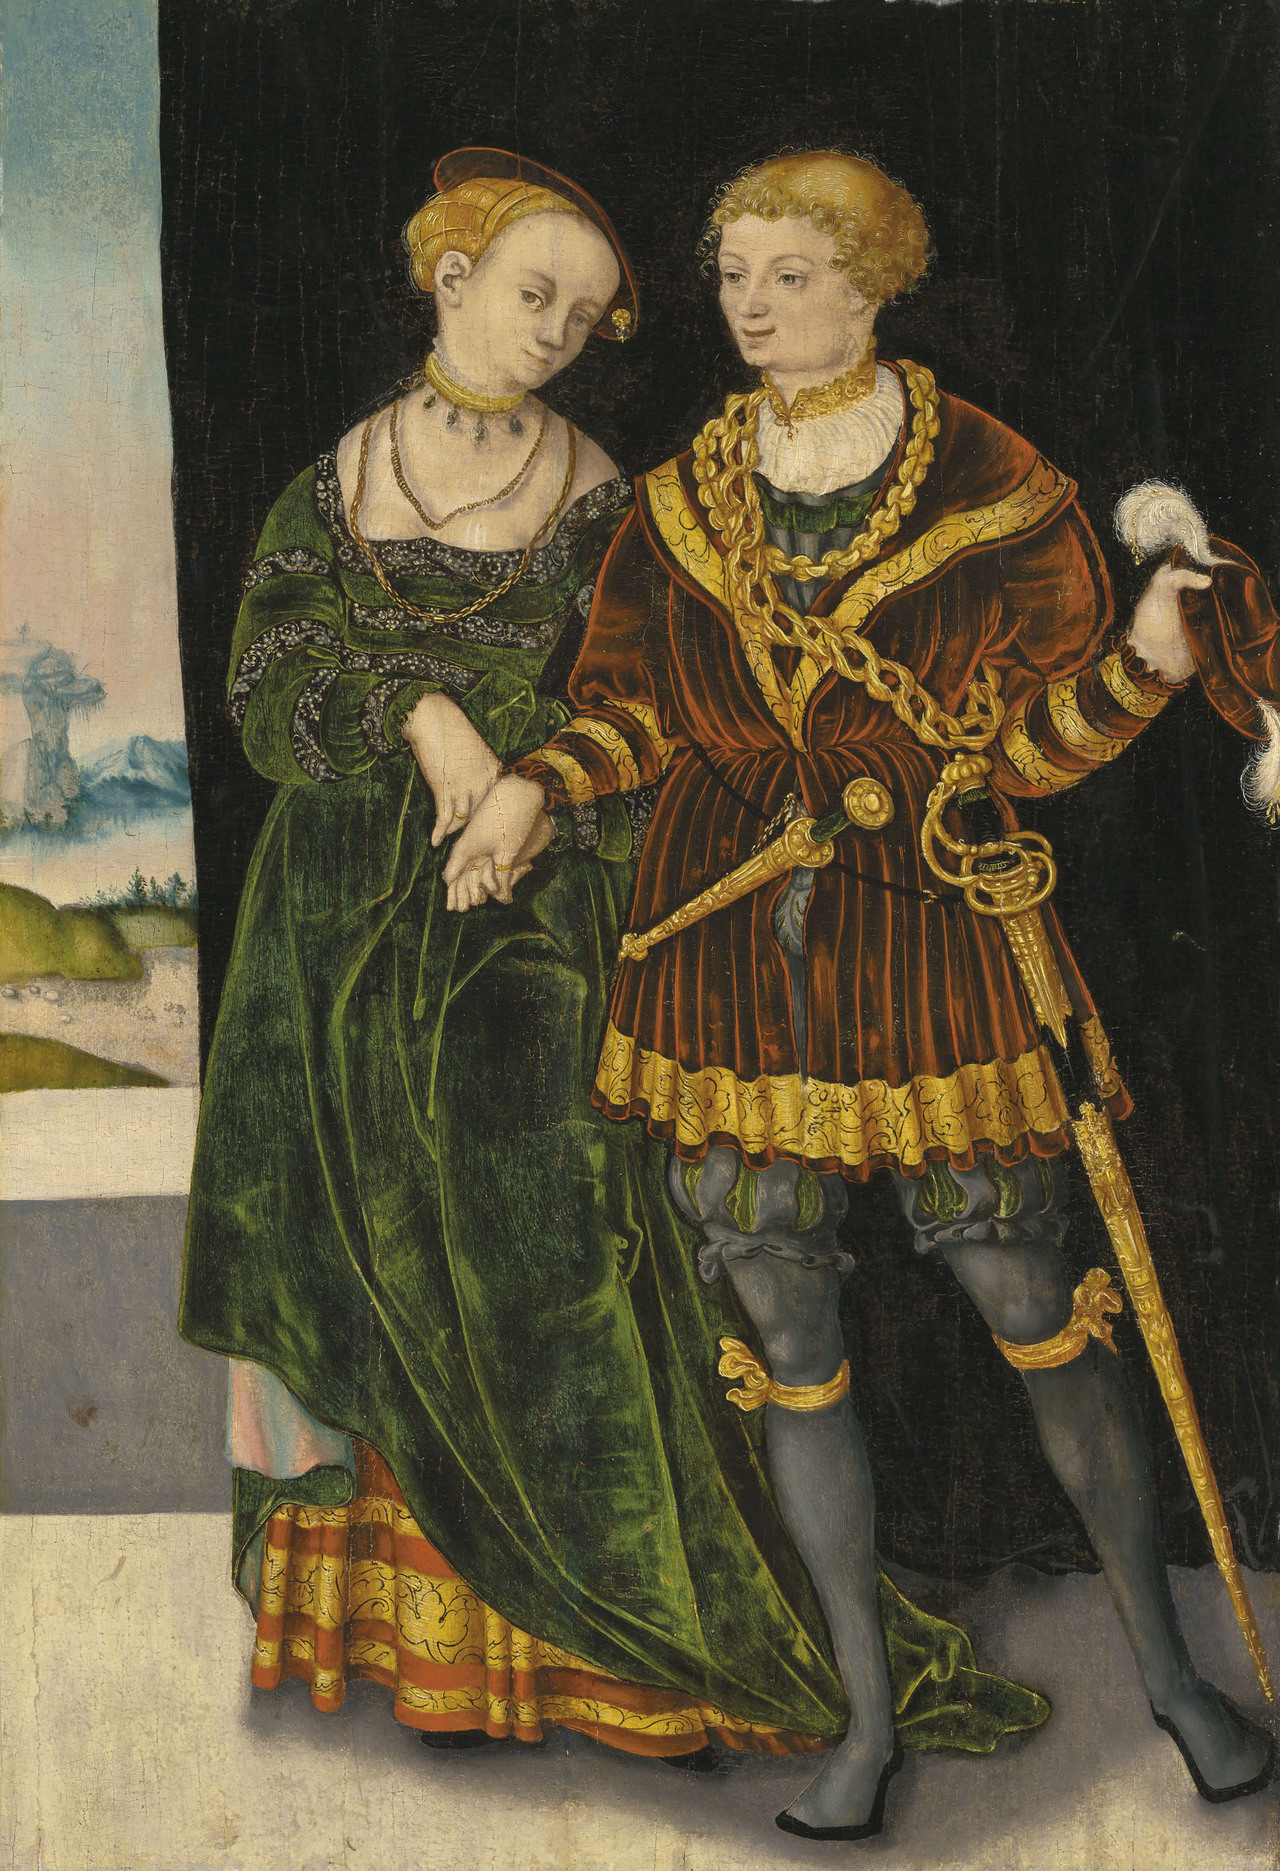 The â€˜Monogrammist I.W.â€™ (fl.1530s, Bohemia), 'Portrait of a Bride and Groom dancingâ€™, 1500s, oil on panel, Bohemian (Czechoslovakian), currently for sale est. 70,000-100,000 GBP in Christieâ€™s Old Masters Evening sale, July 2019